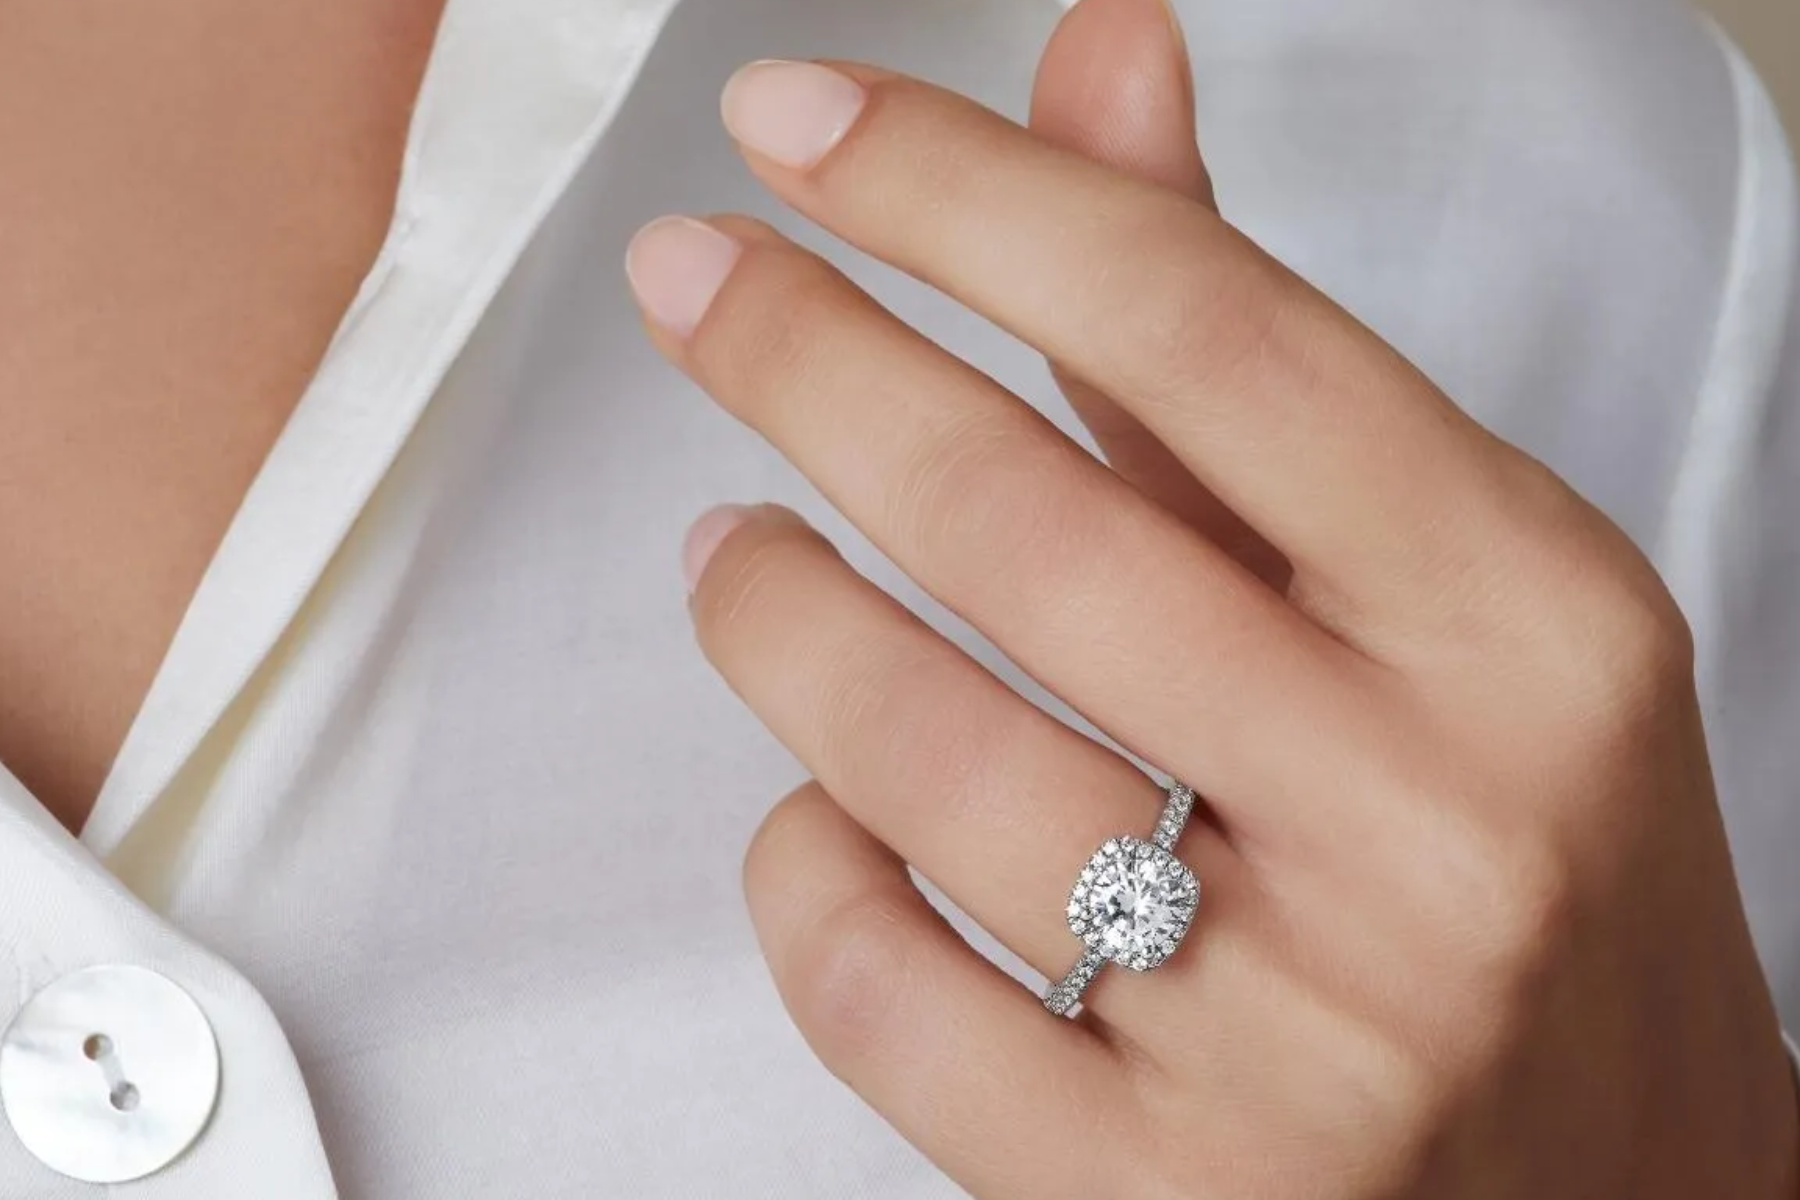 Halo Engagement Rings - Perfect Choice For Proposals